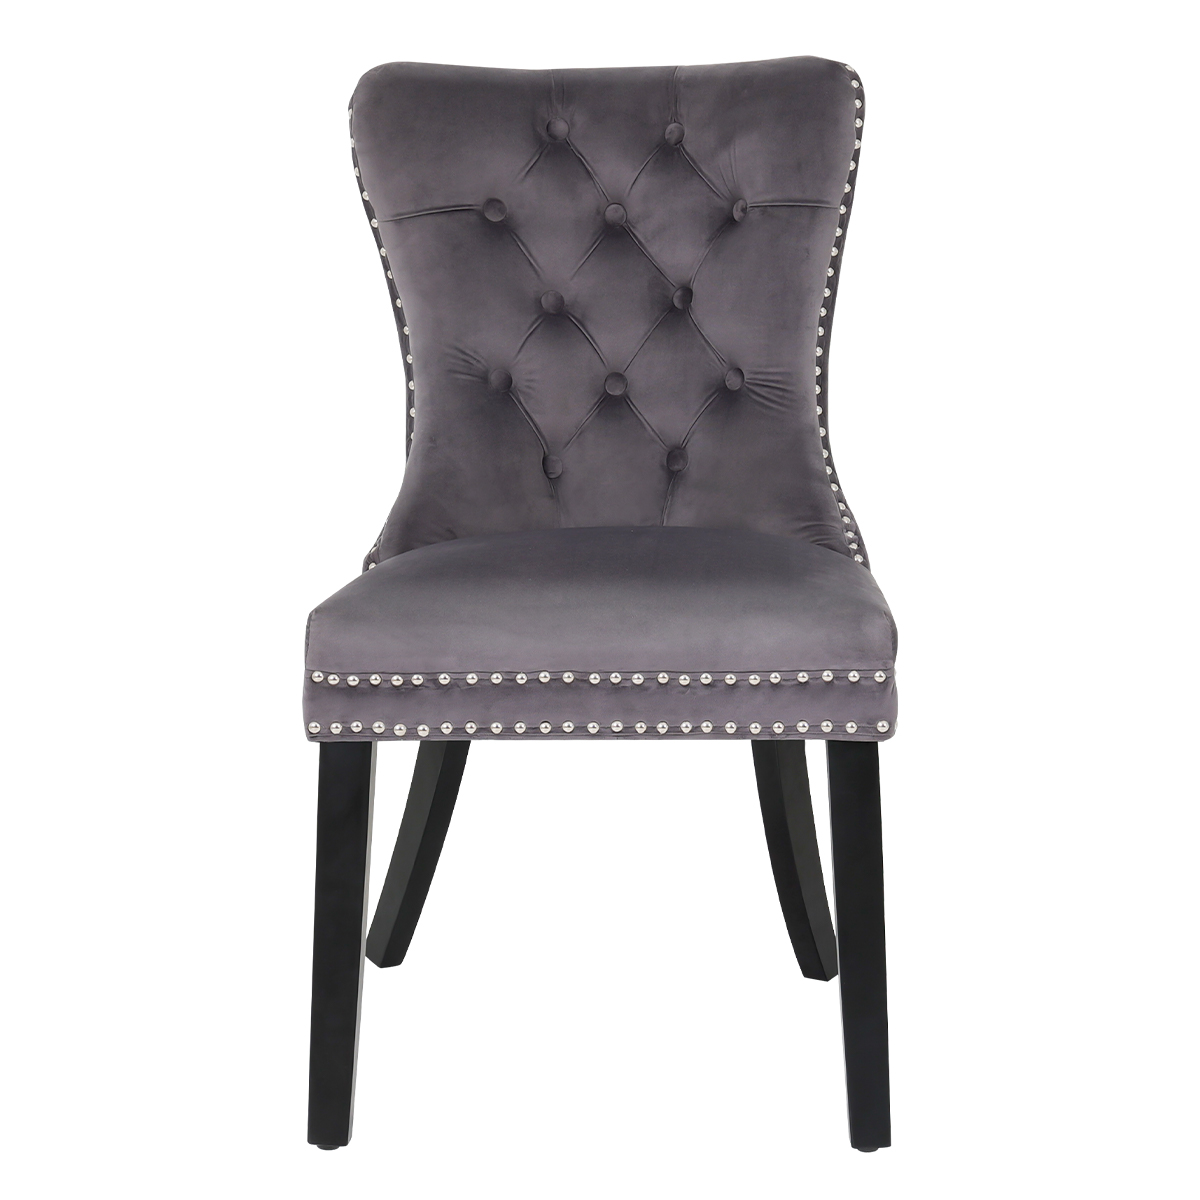 DE-IF801-GY-X High-end Velvet Dining Room Chairs Upholstered Elegant Tufted Chair with Luxurious Button Nailed Trim Ring Pull Armless Accent Chair